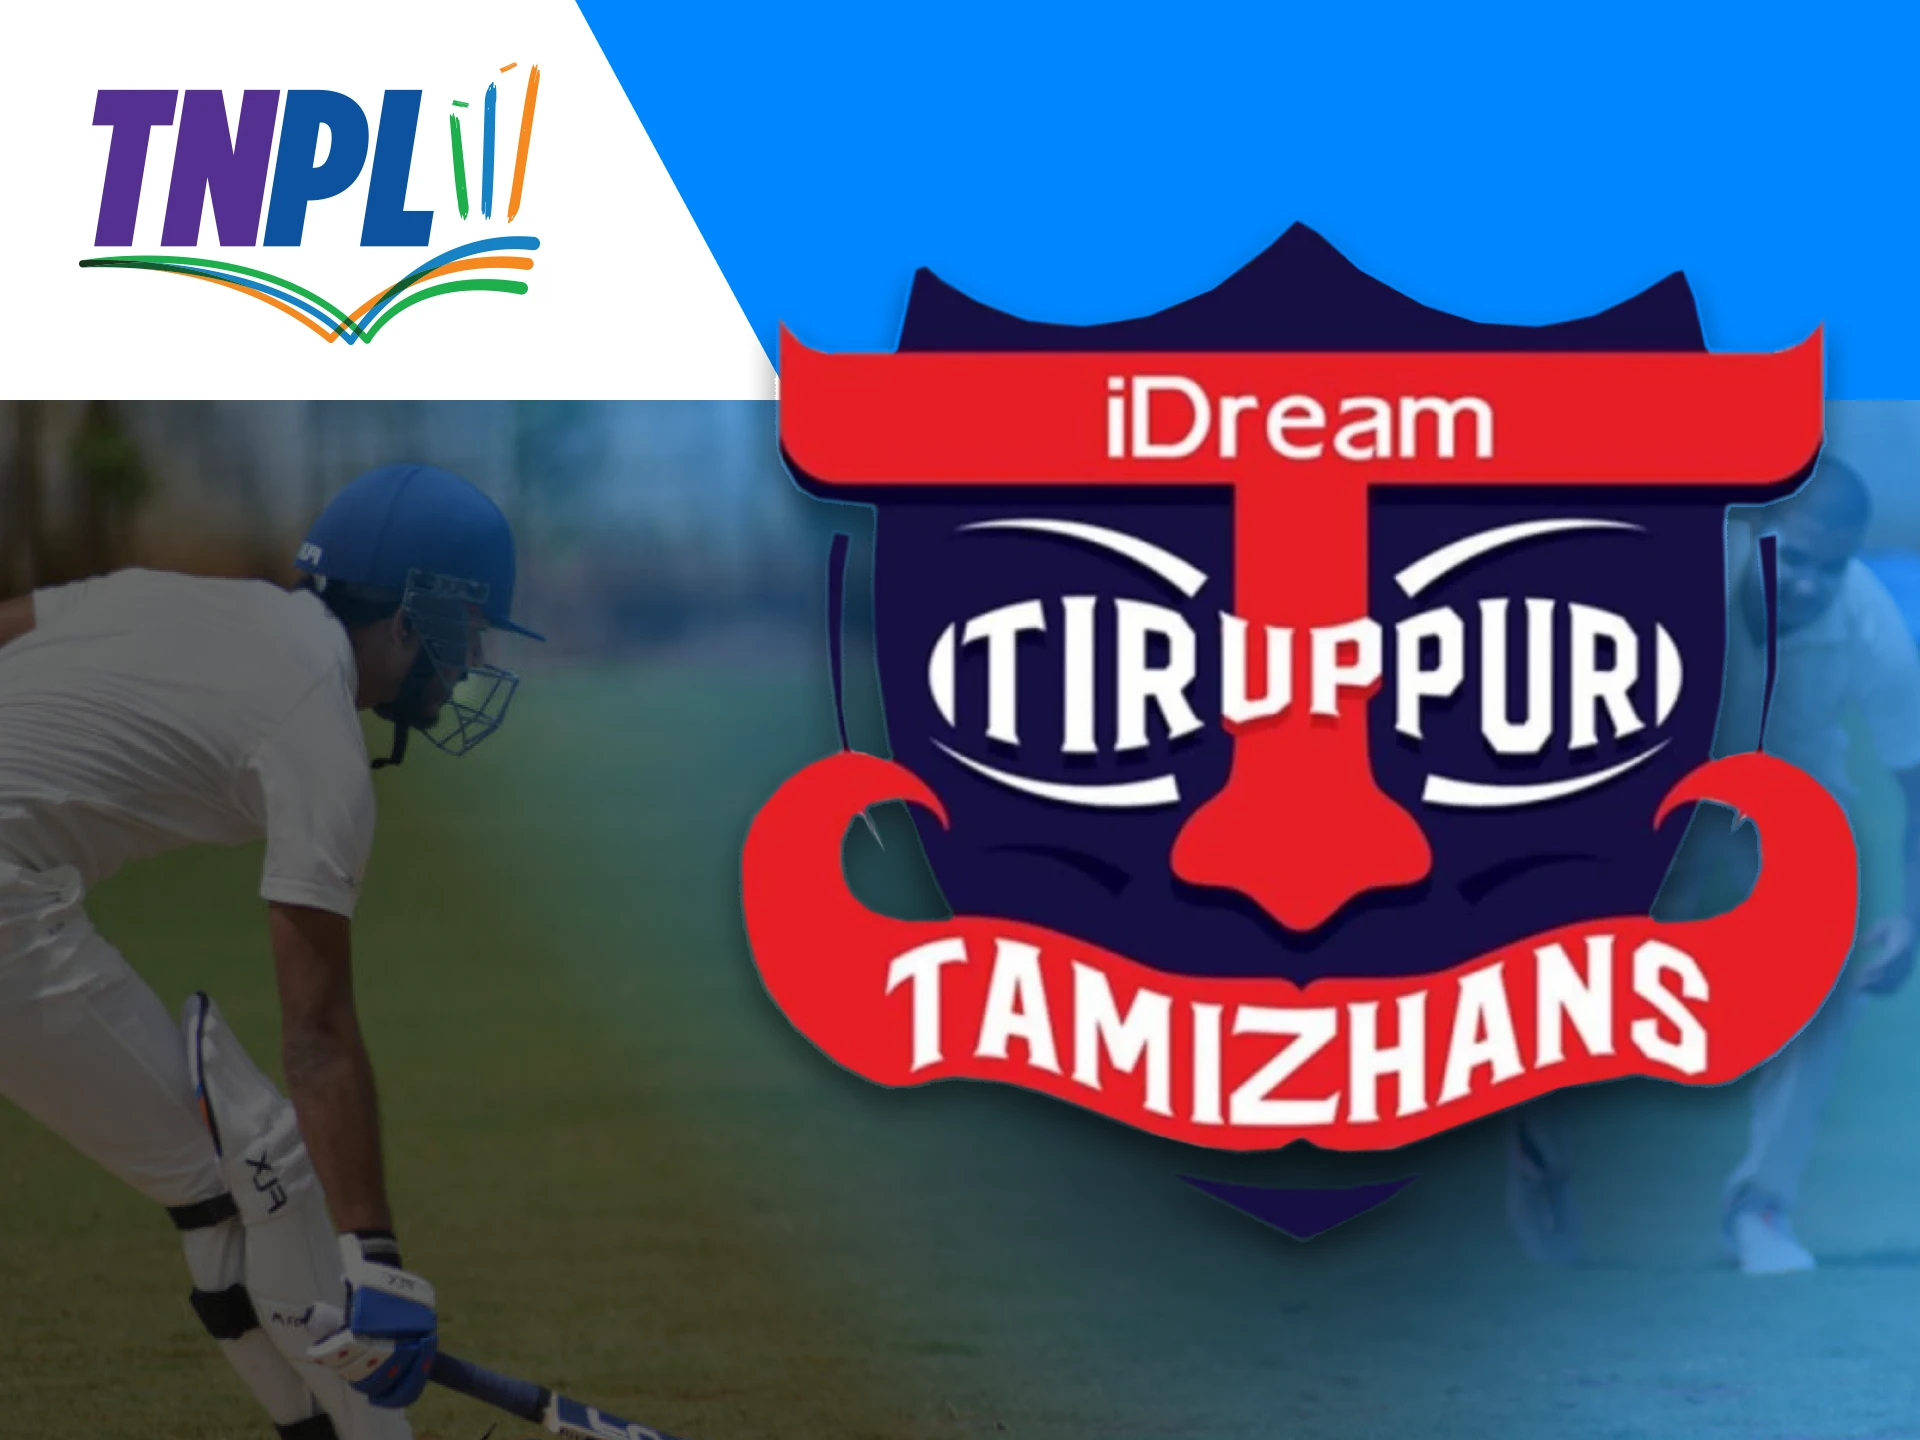 The IDream Tiruppur Tamizhans team joined the TNPL recently.